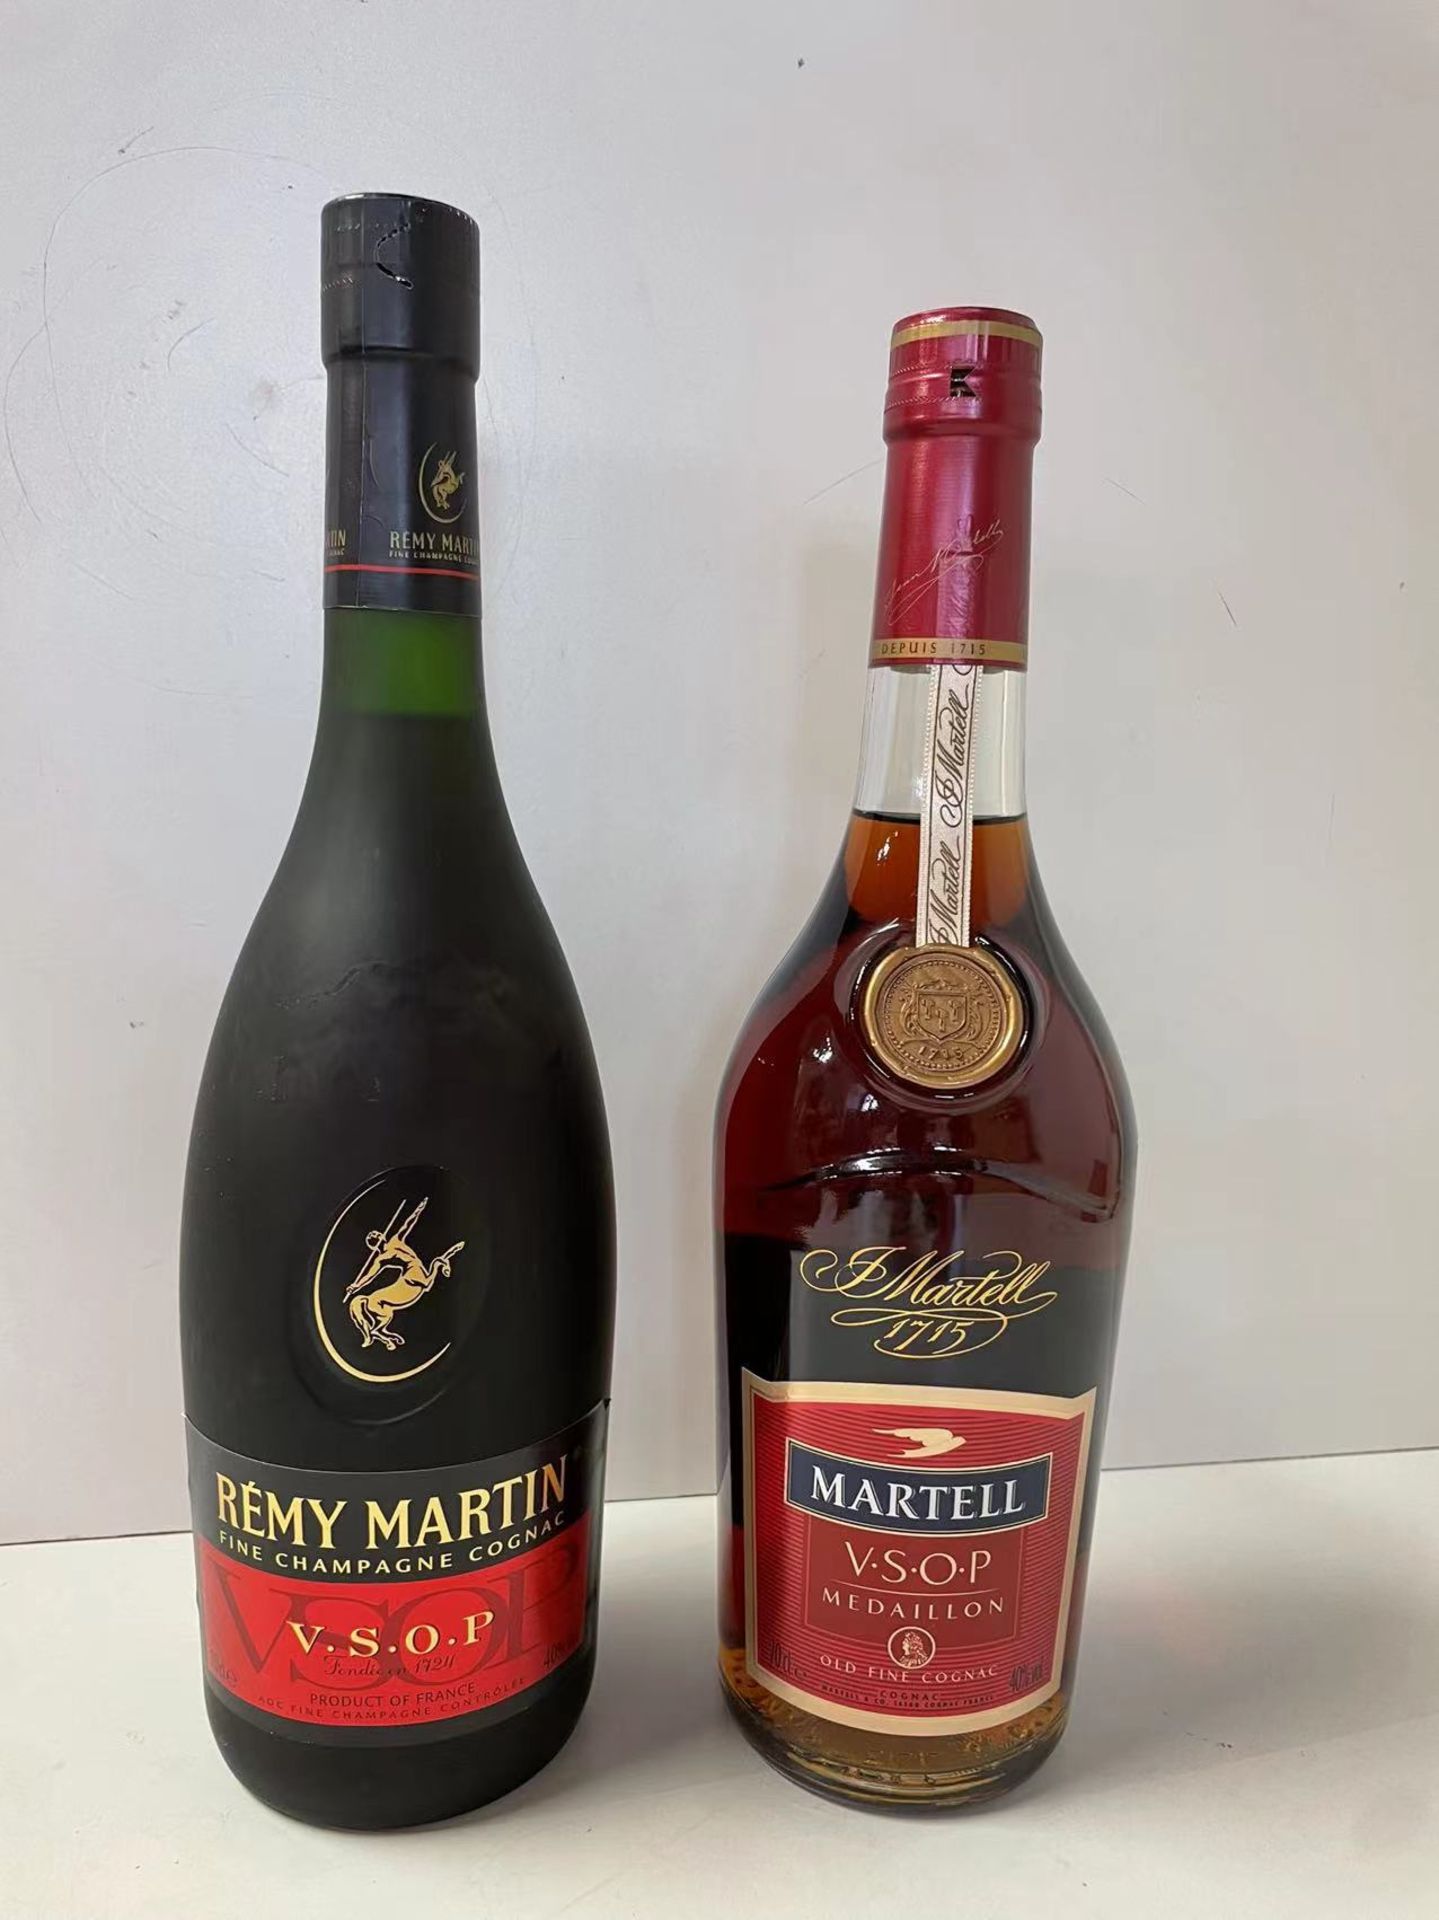 FINE CHAMPAGNE COGNAC 1 bouteille REMY MARTIN 1 bouteille MARTELL